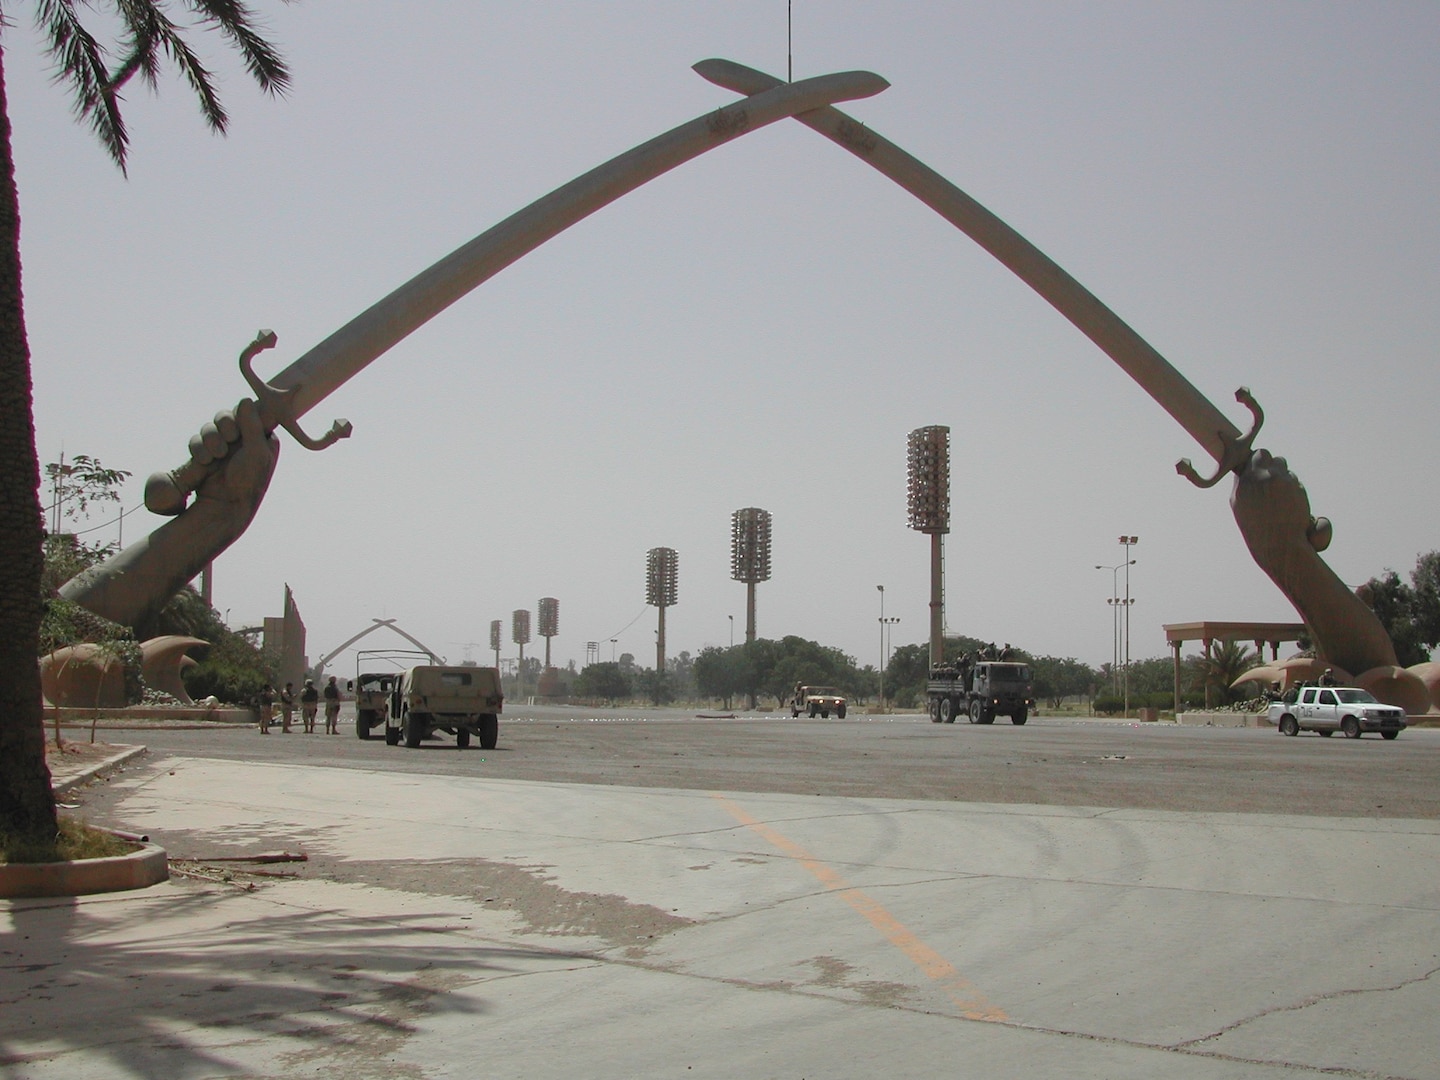 The Swords of Qadisiyah in Central Baghdad, Iraq.